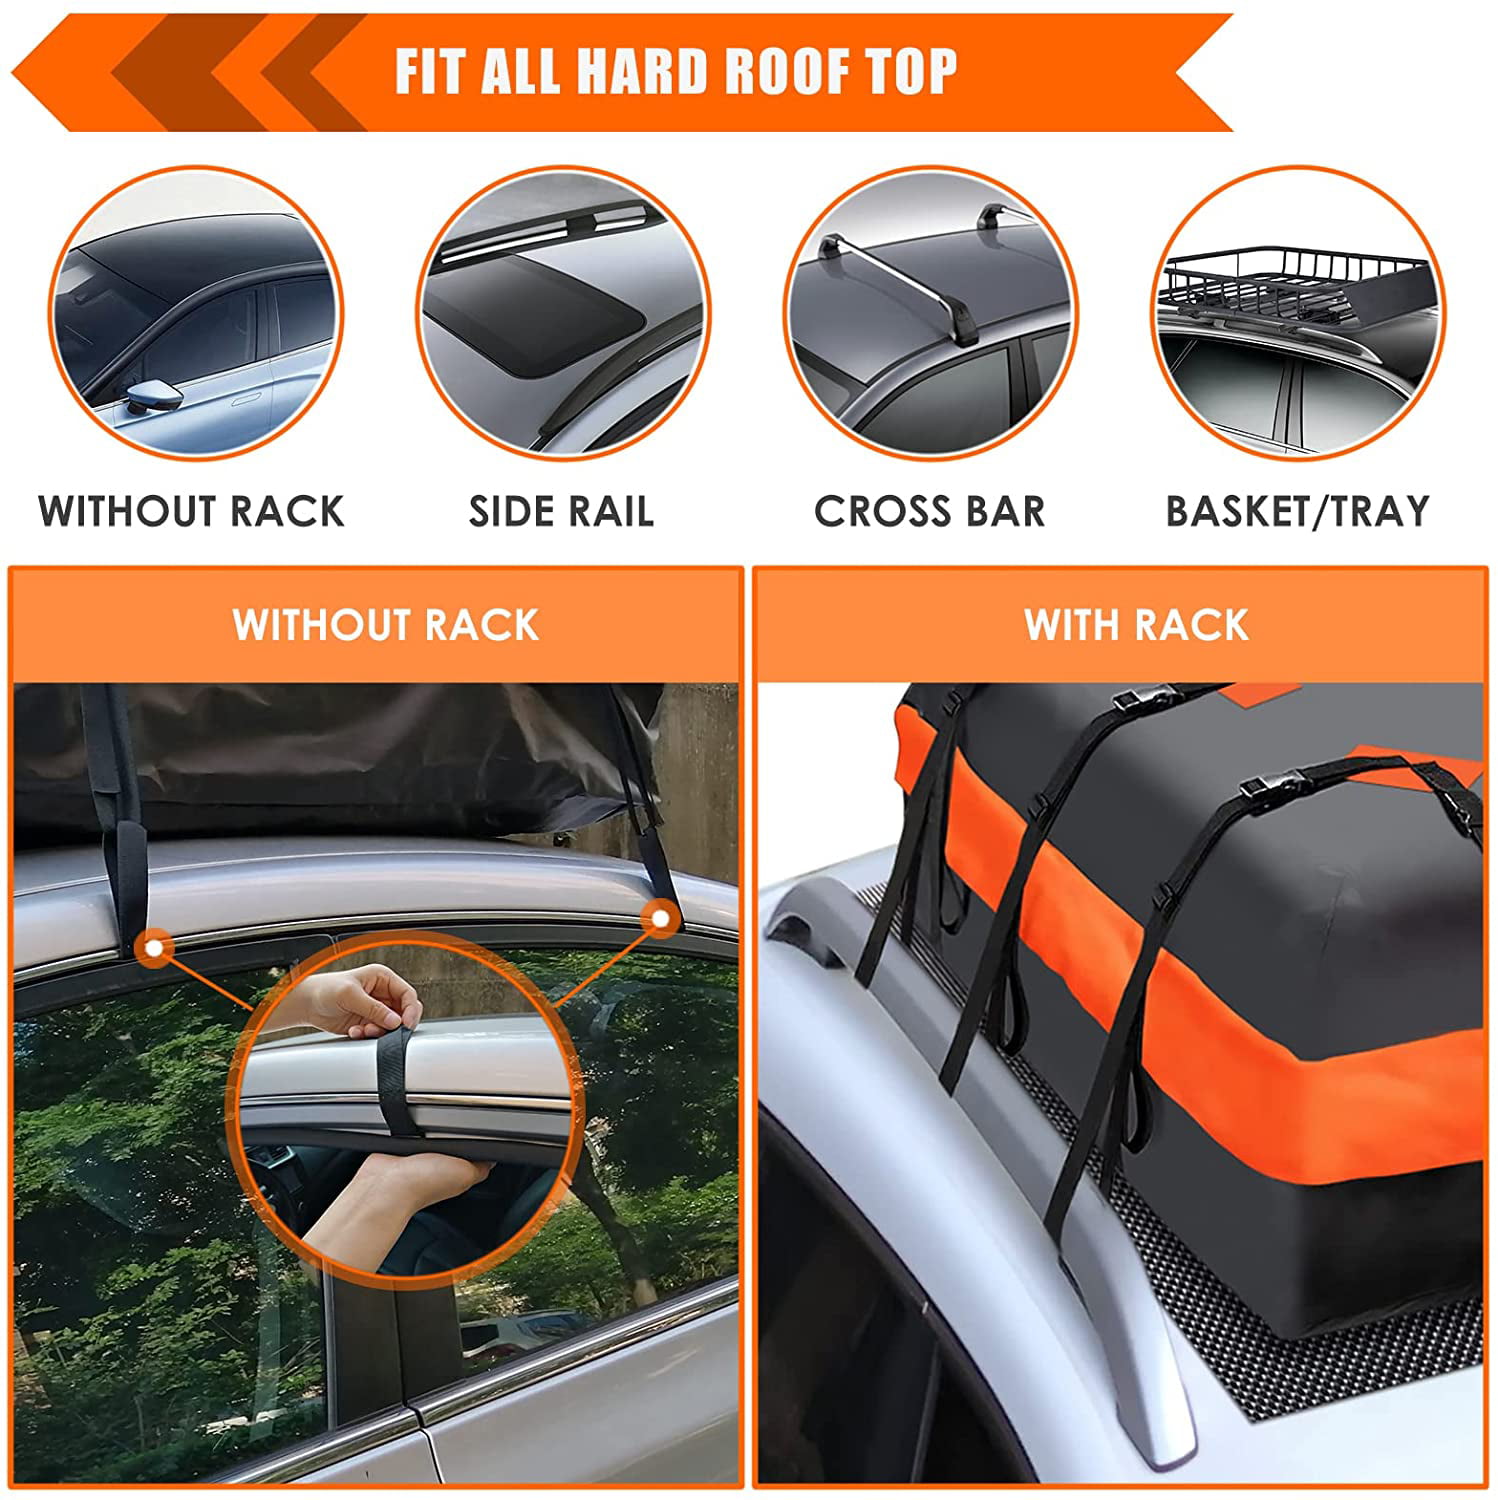 Includes Anti-Slip Mat XBEEK Car Roof Bag Rooftop Cargo Carrier Waterproof 15 Cubic Car Top Carrier for All Cars with/Without Rack 8 Reinforced Straps Luggage Lock 6 Door Hooks 